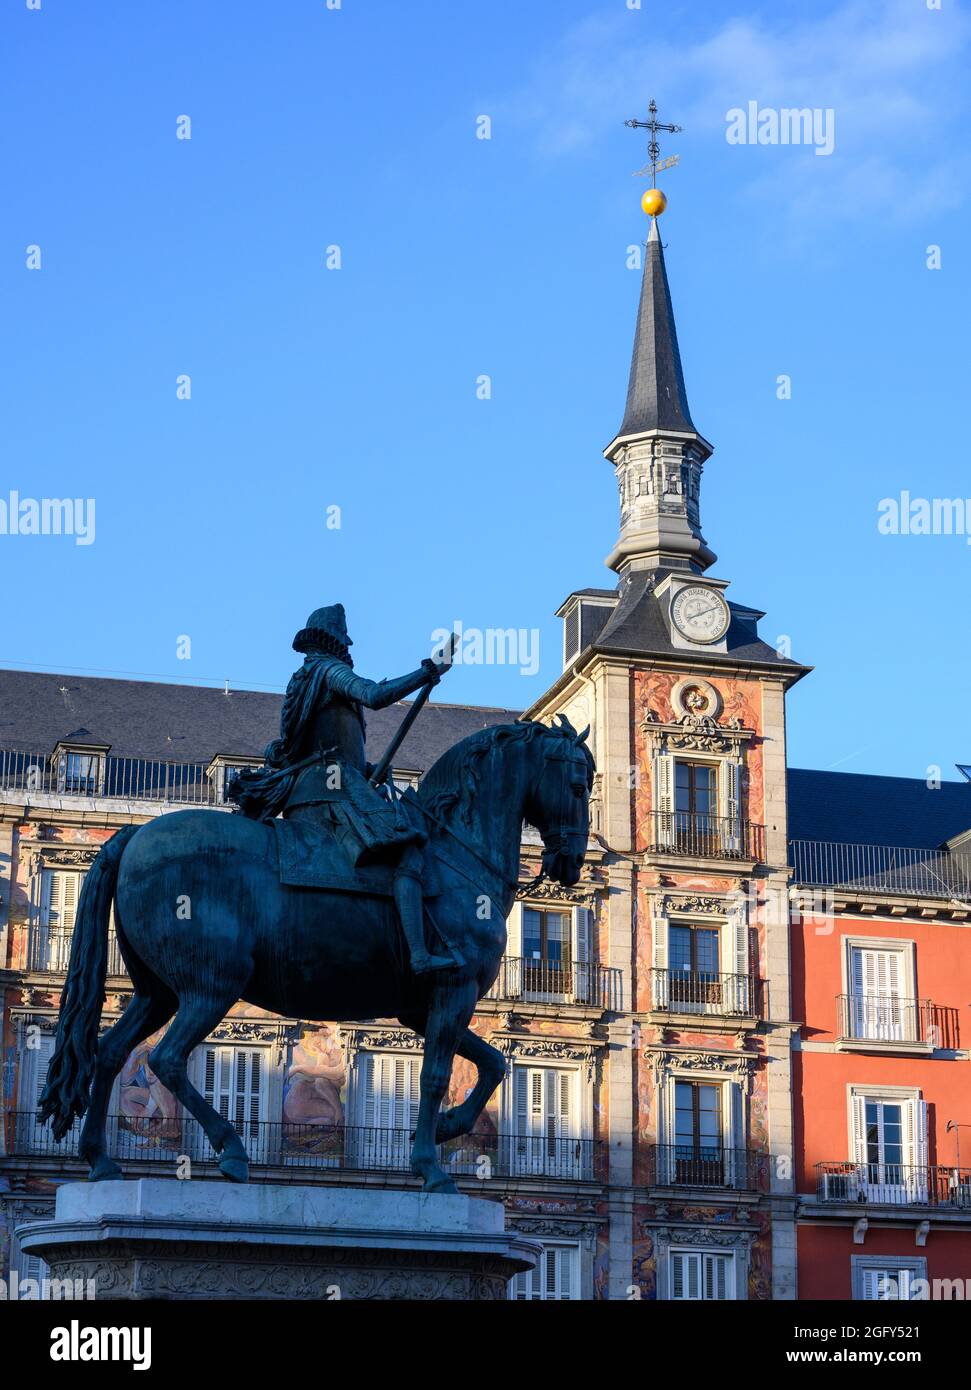 Equestrian statue of Philip III with the Casa de la Panaderia in the background in the Plaza Mayor, central Madrid, Spain. Stock Photo